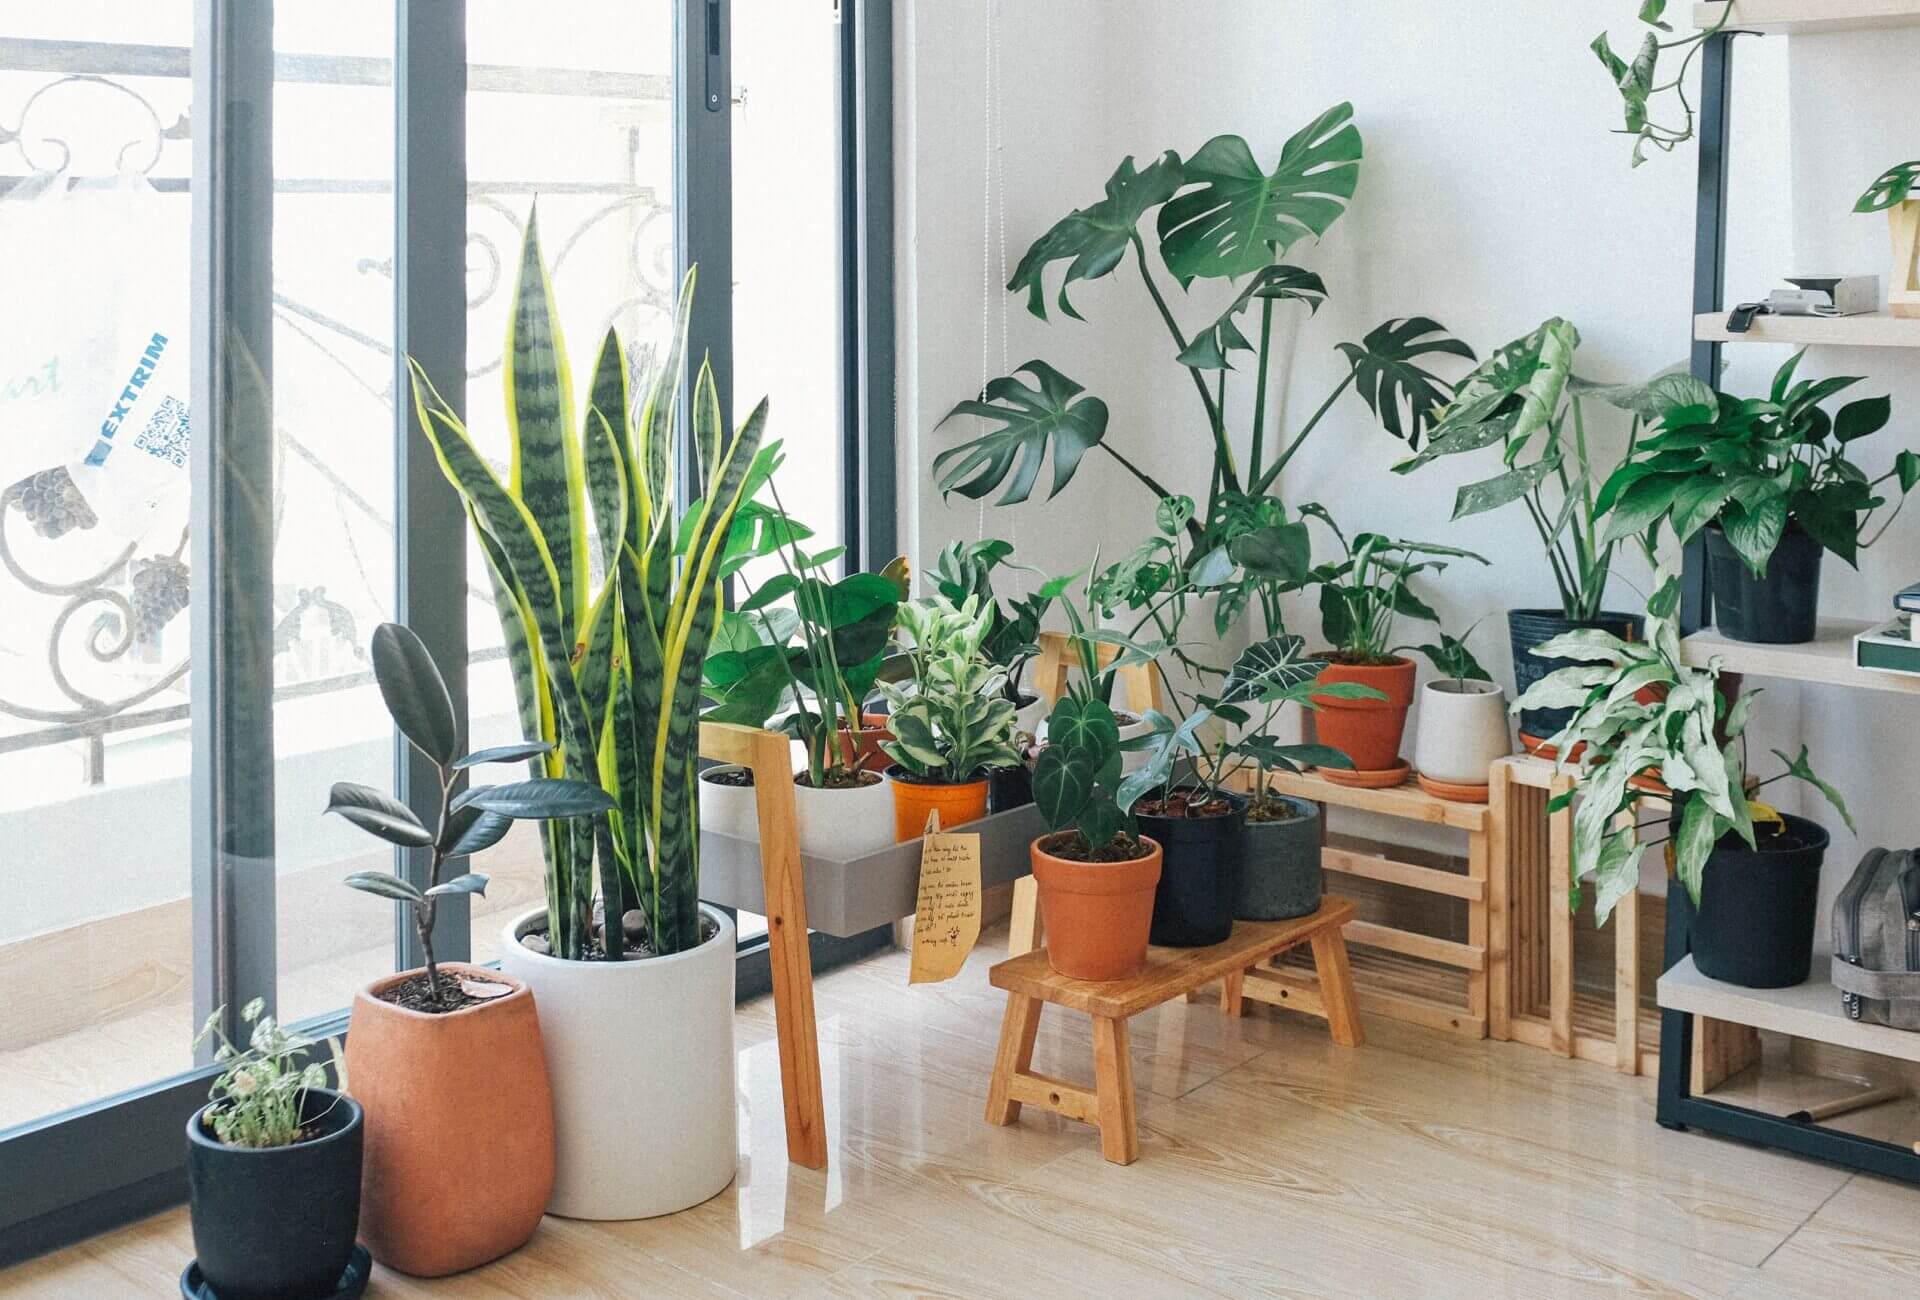 plants are a powerful way to improve indoor air quality